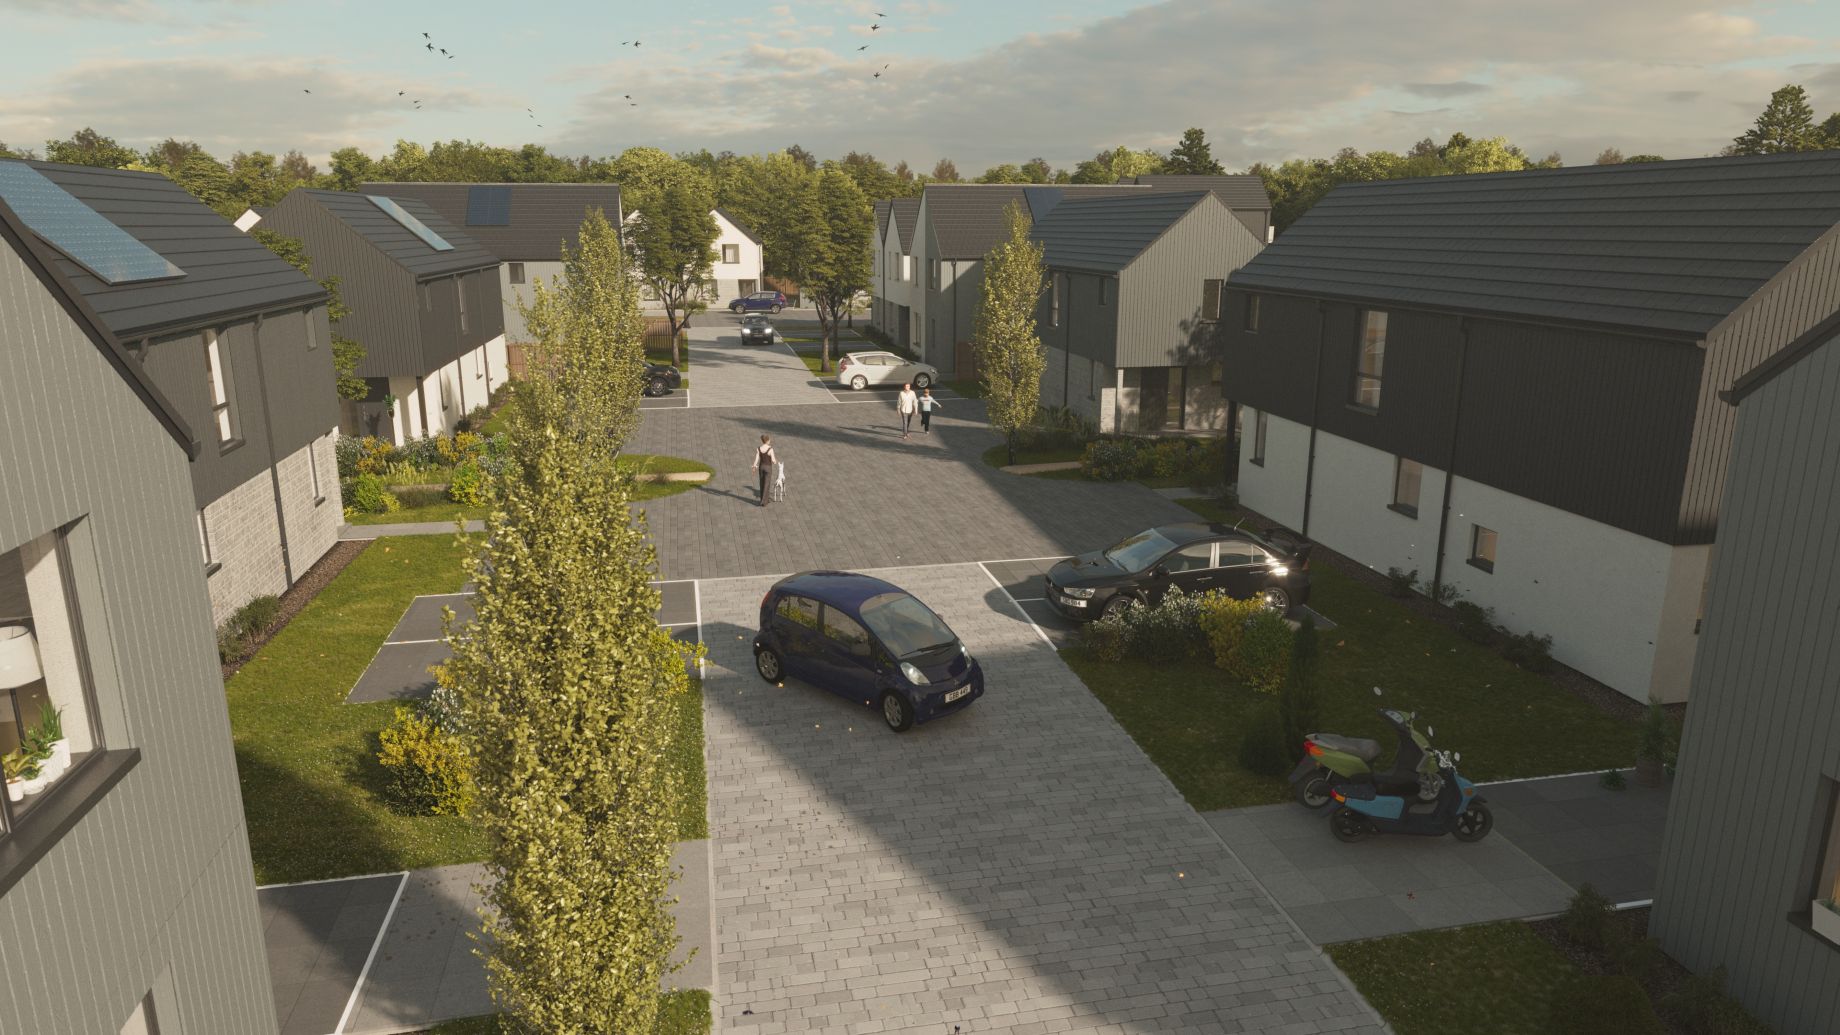 Plans lodged for 117 new homes in Lauder